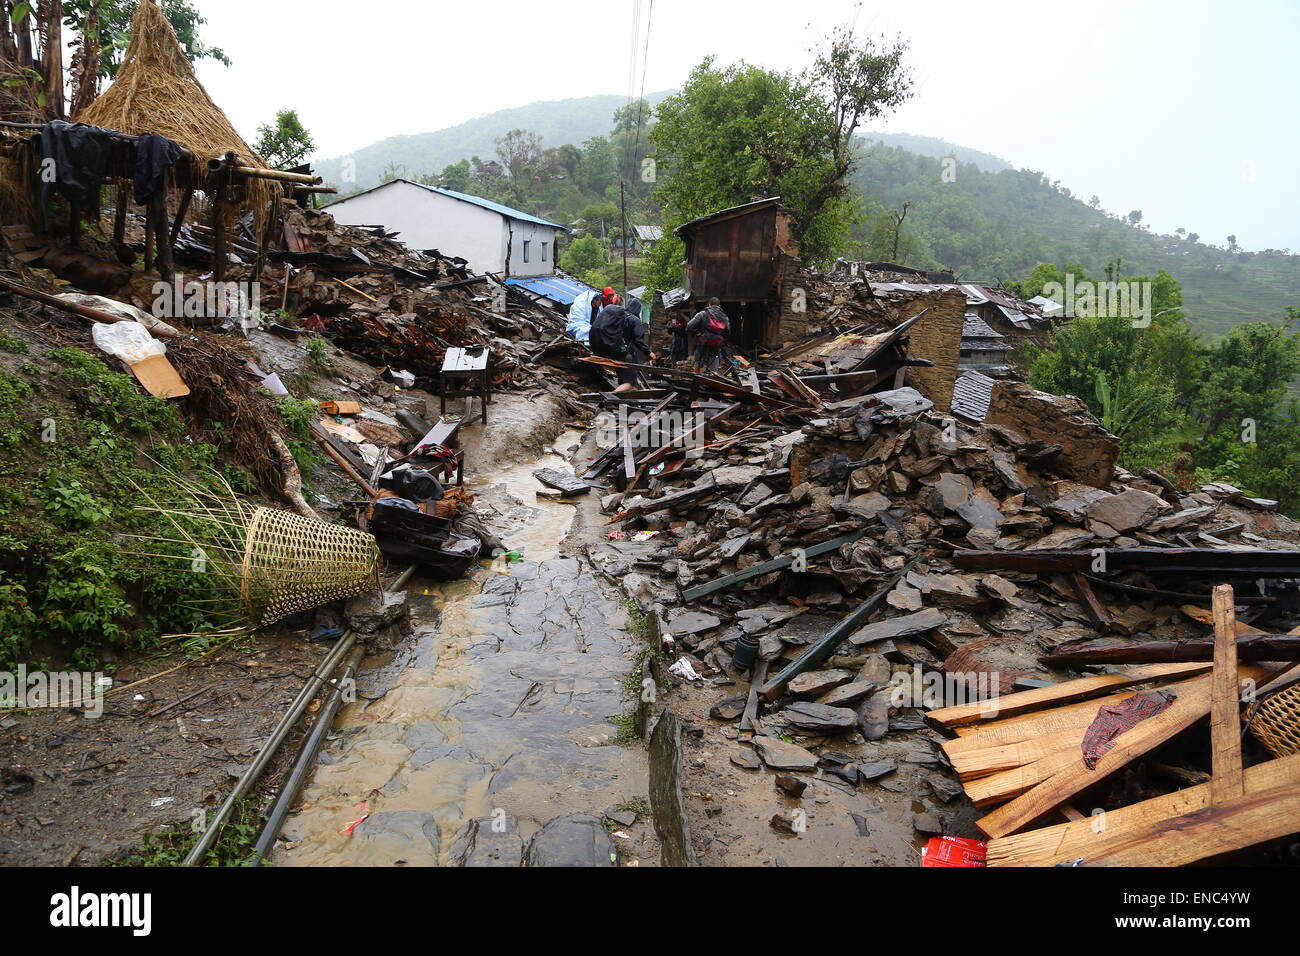 Destroyed houses in the region of Saurpani in the Gorkha district, near the epicenter of the earthquake in Nepal, 28 April 2015. German tourist Jordane Schoenfelder and other foreigners have set up a medical and aid camp here for the locals - called base camp - which serves as a starting point for hikes in the surrounding mountains and for shipments of aid packages. Photo: JORDANE SCHOENFELDER/dpa Stock Photo